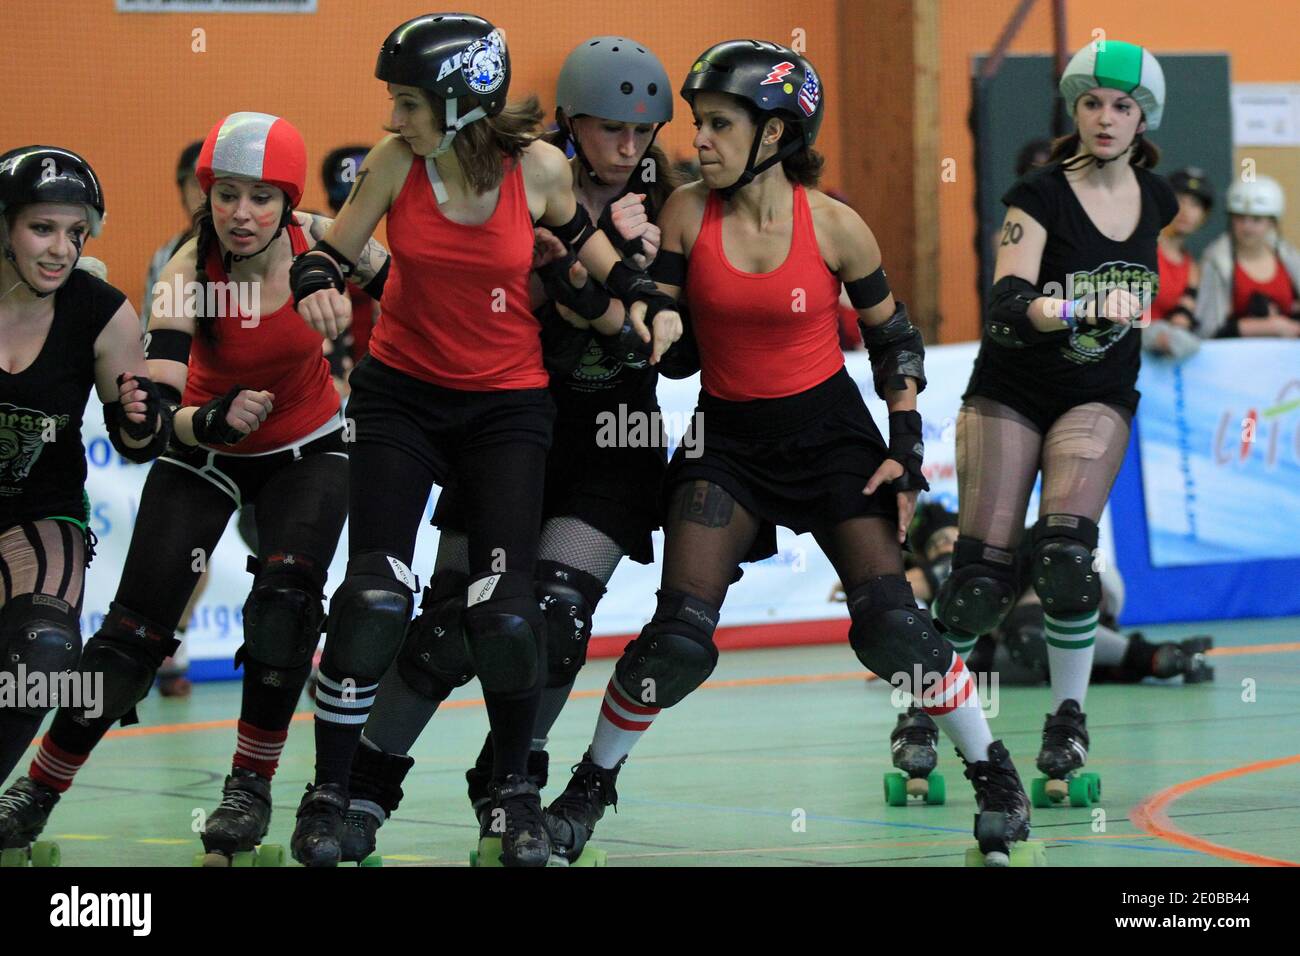 Paris Roller Girls (red) playing a match against Duchesses Nantes Roller Derby  Girls (green) during a national tournament in Nantes, western France on  March 17, 2012. Roller Derby is an American-invented contact